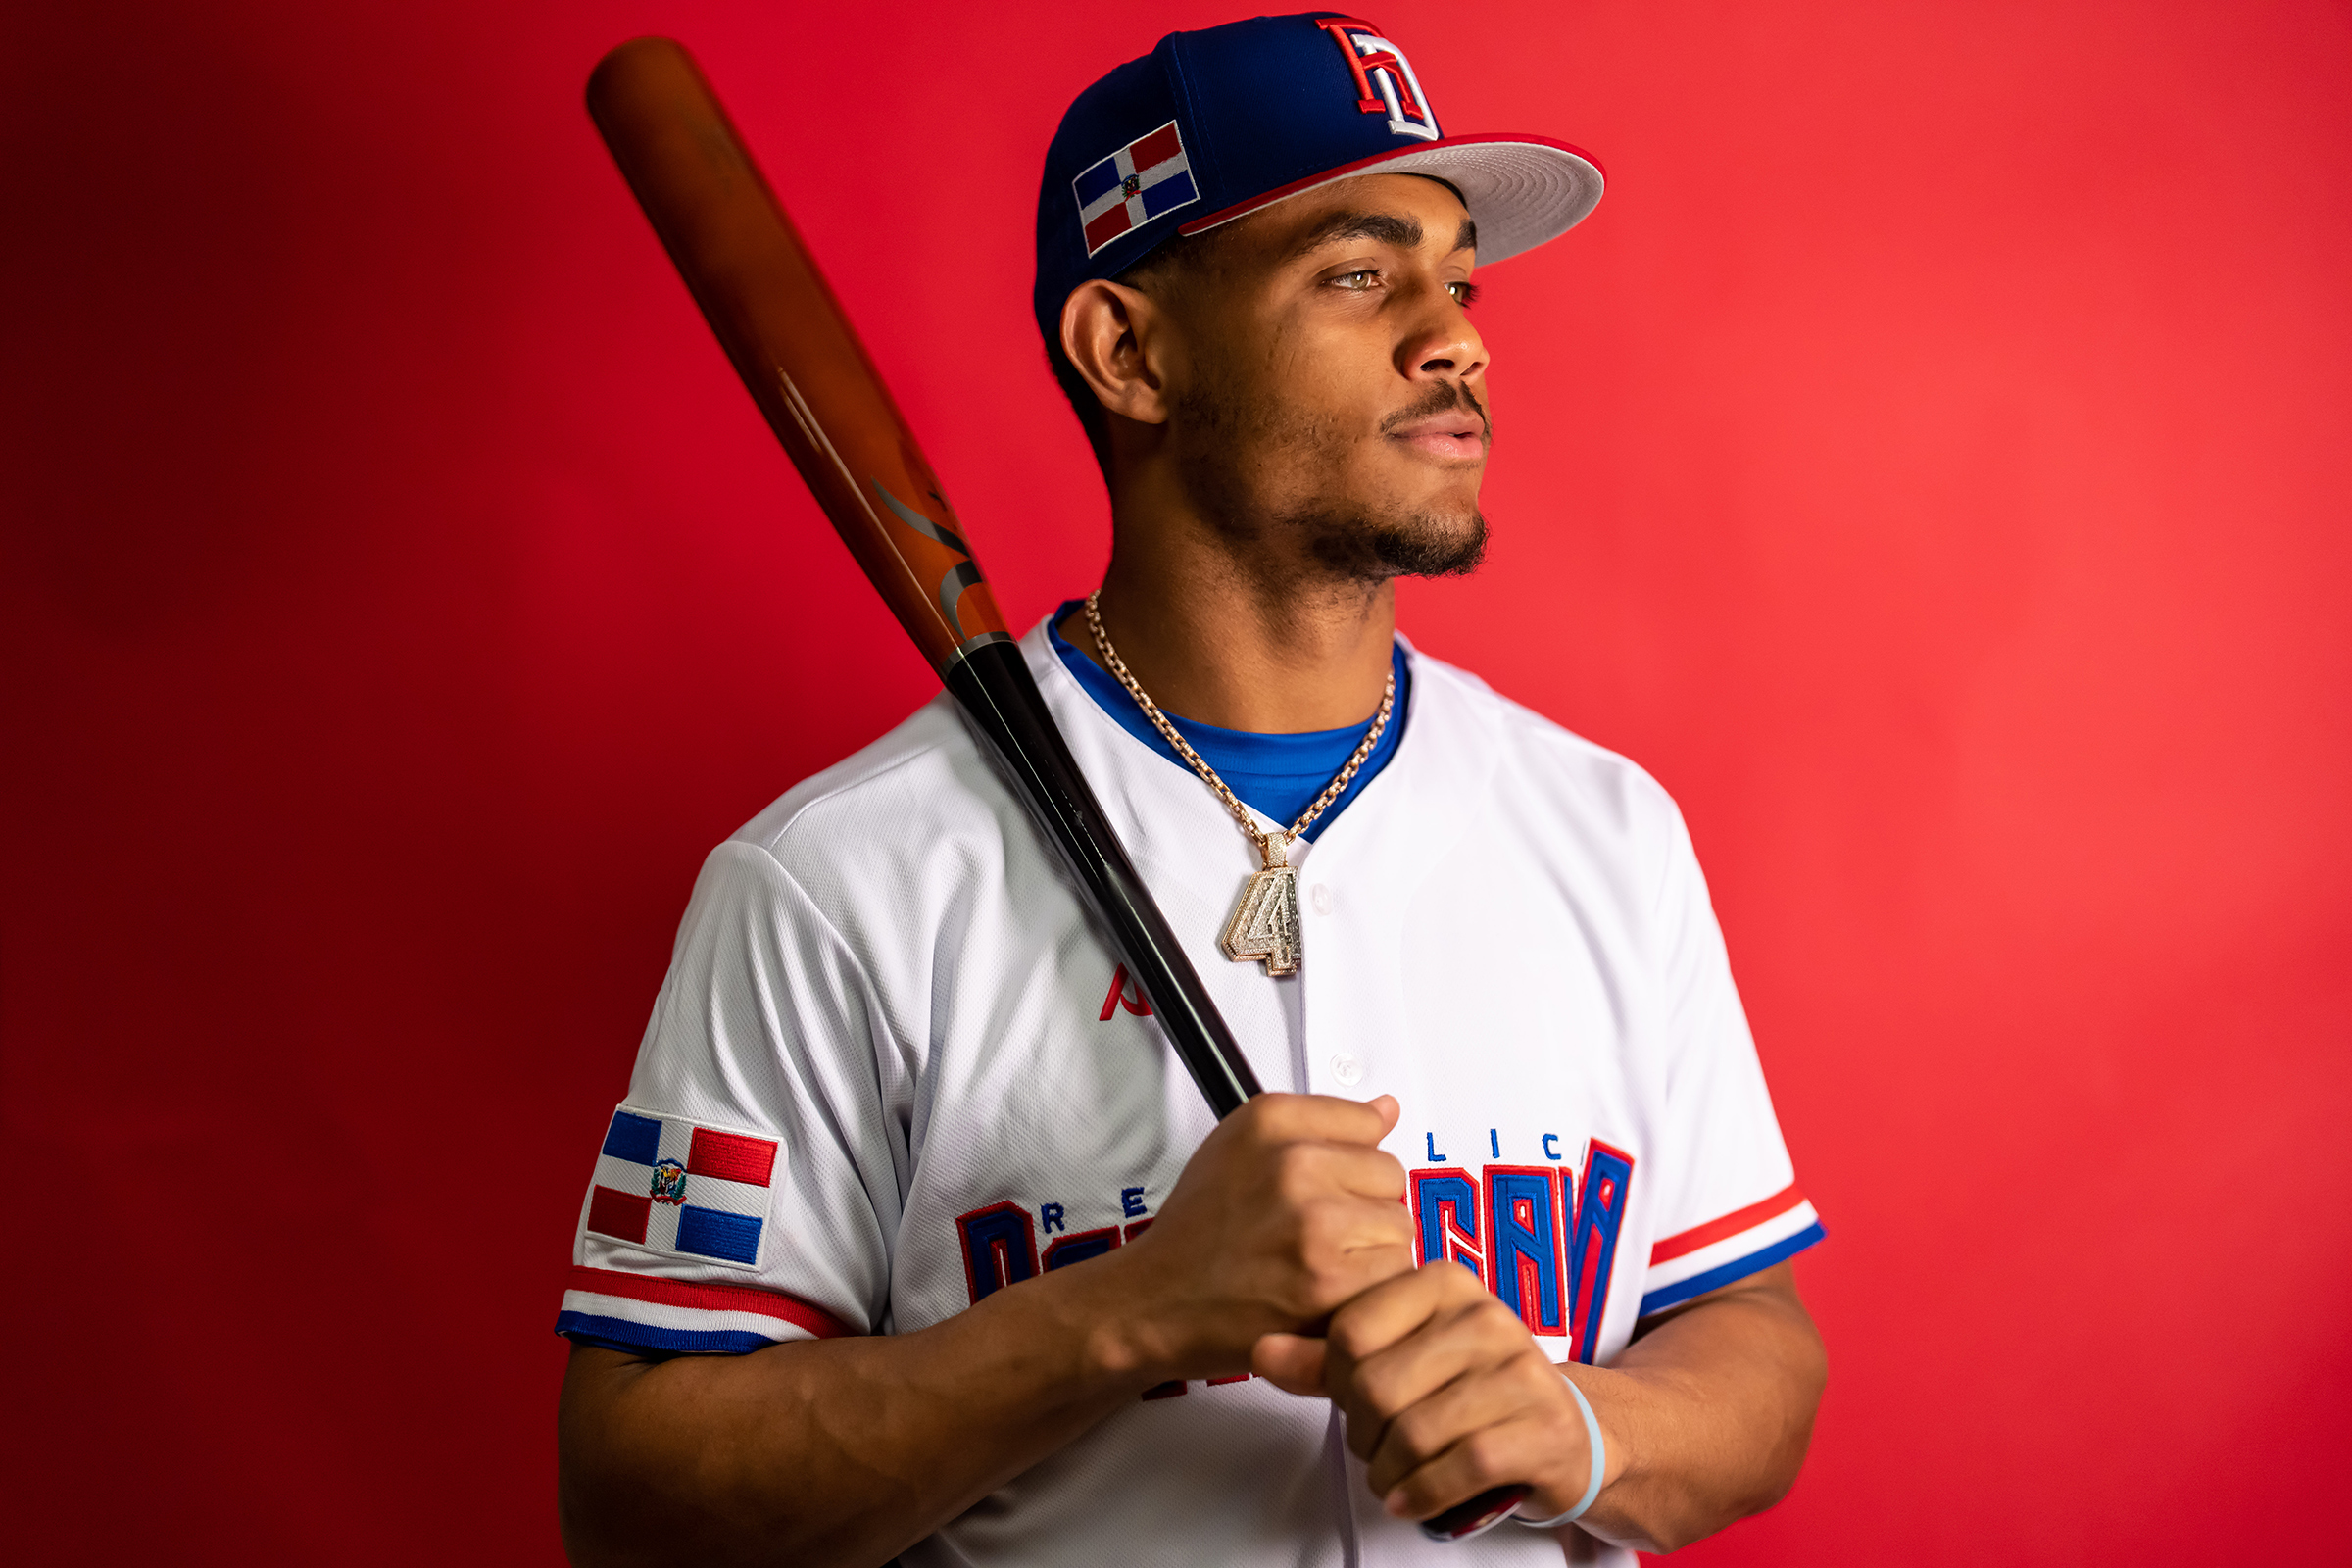 Seattle Mariners’ Julio Rodríguez representing Team Dominican Republic at the World Baseball Classic in Fort Myers, Fla., in March 2023. (Brace Hemmelgarn—WBCI/MLB Photos/Getty Images)